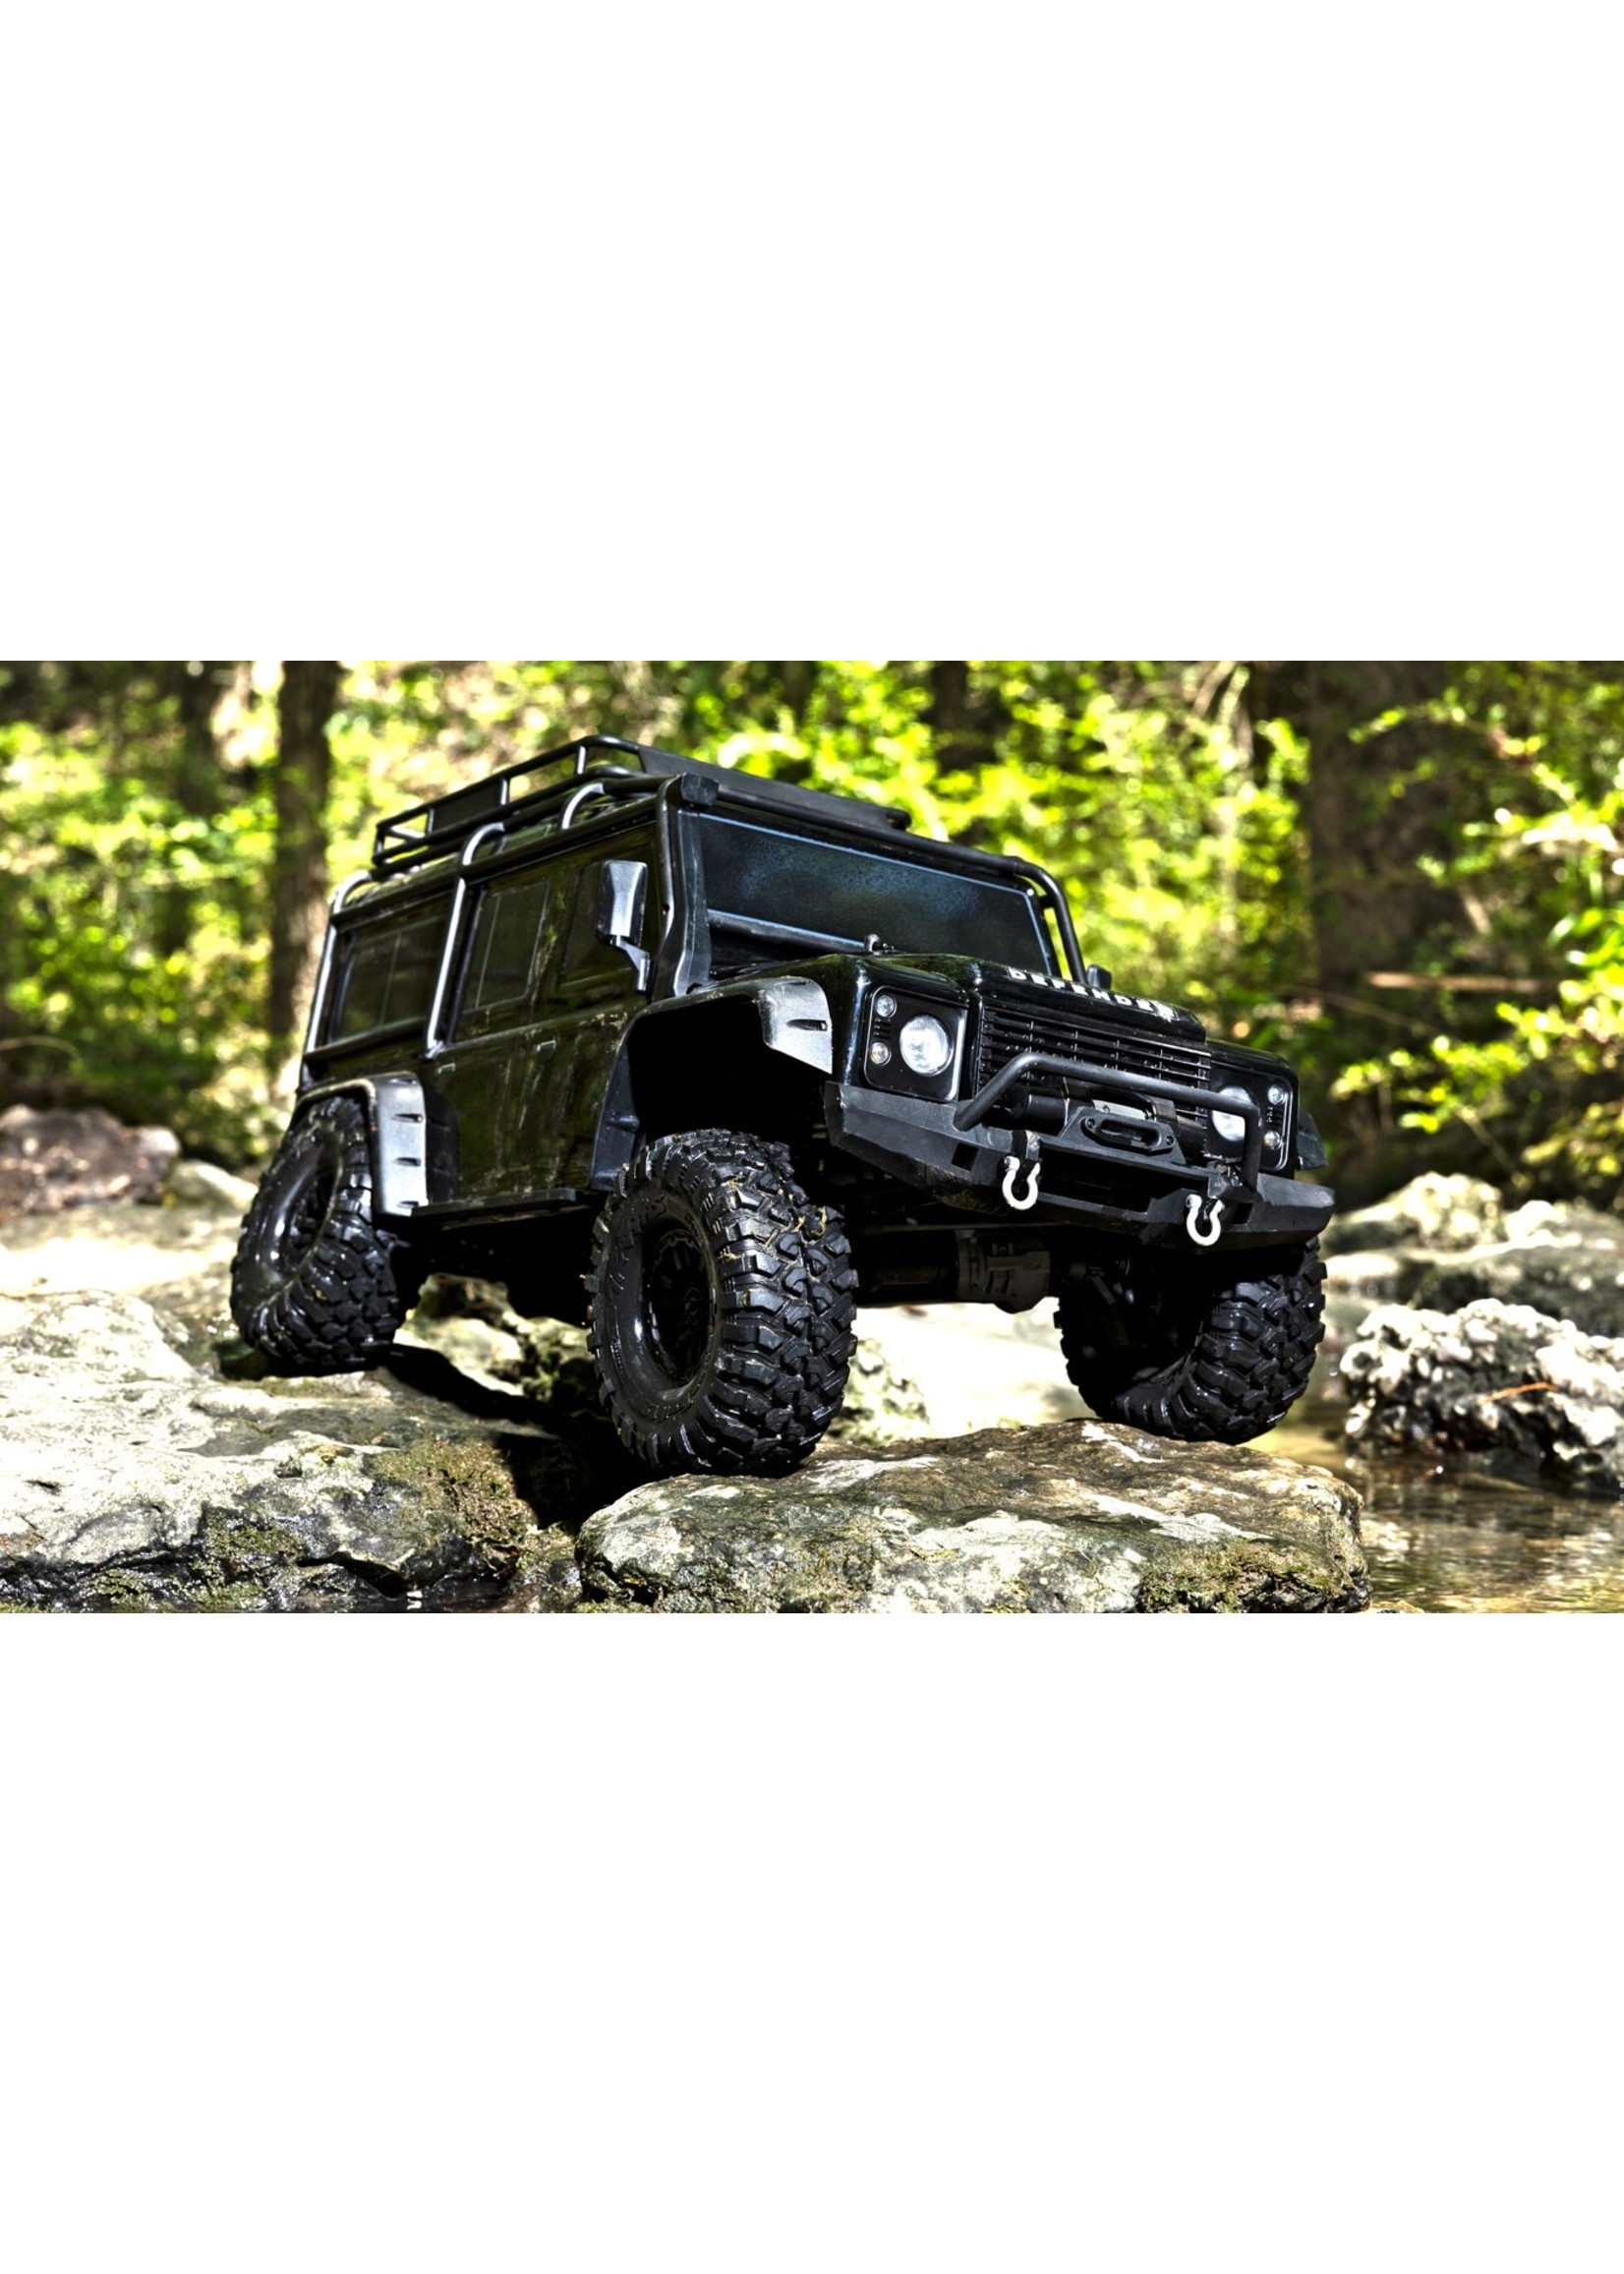 Traxxas 1/10 TRX-4 Defender RTR Scale and Trail Crawler - Black